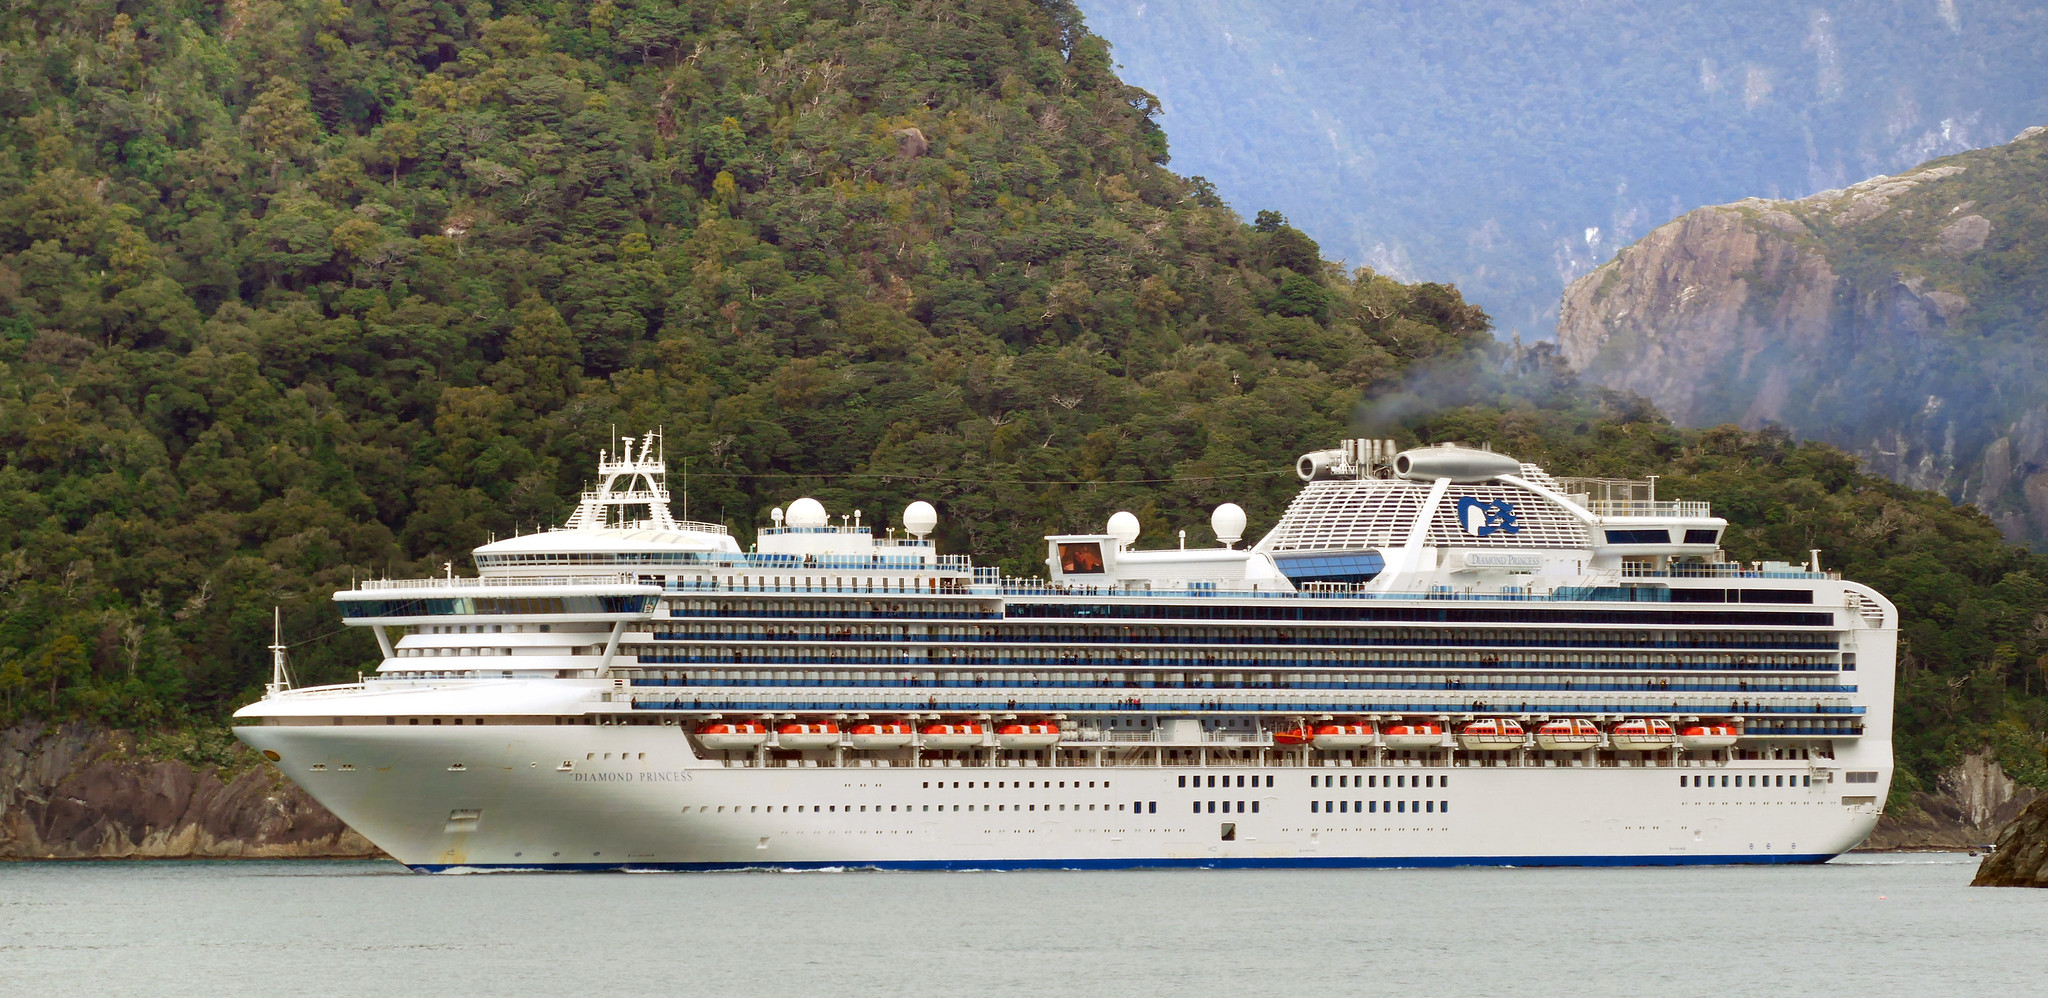 20 Hacks Your Cruise Line Will Never Tell You About